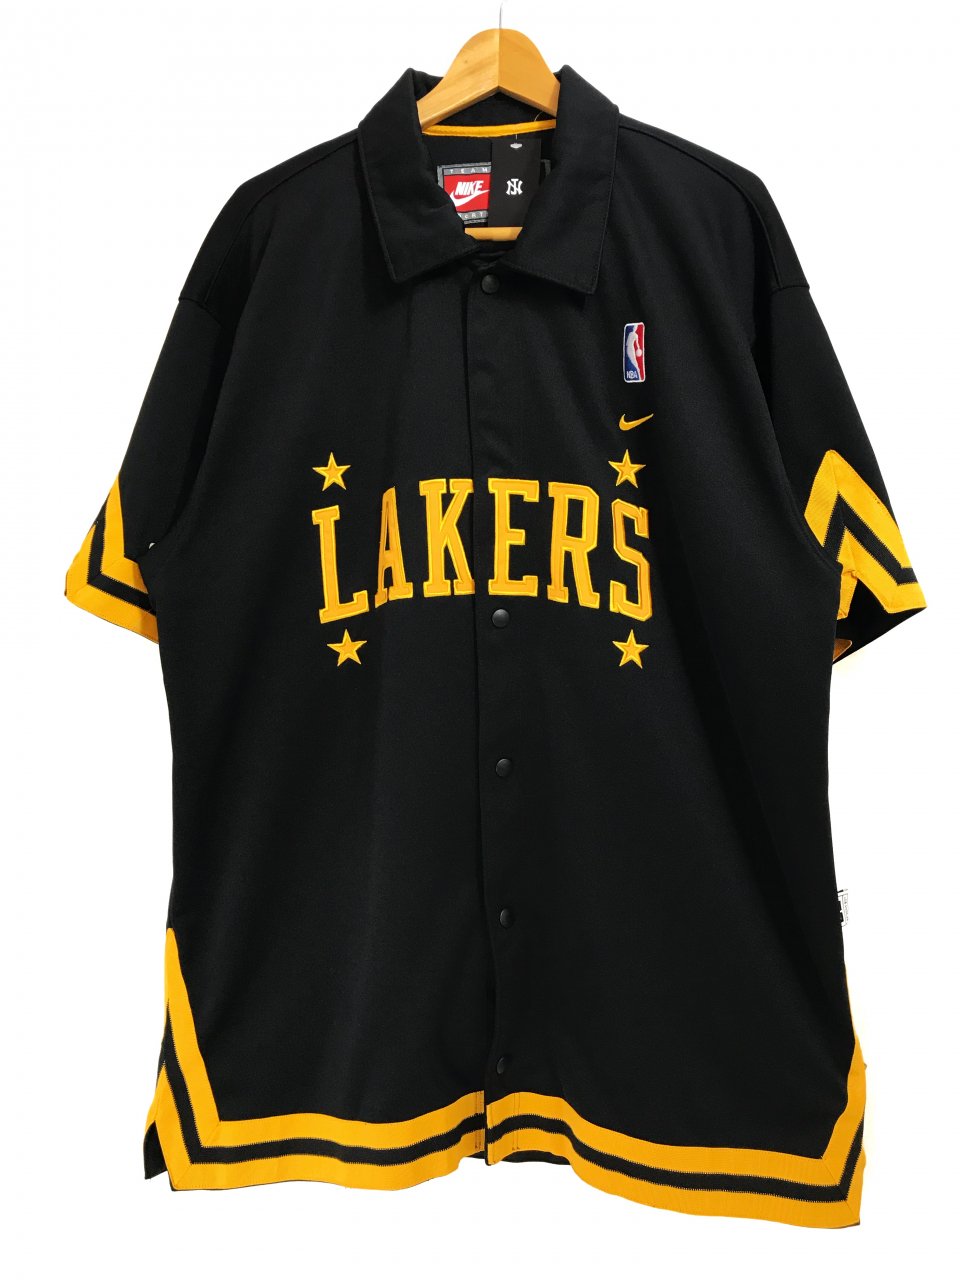 00s NIKE Warm Up Jersey 